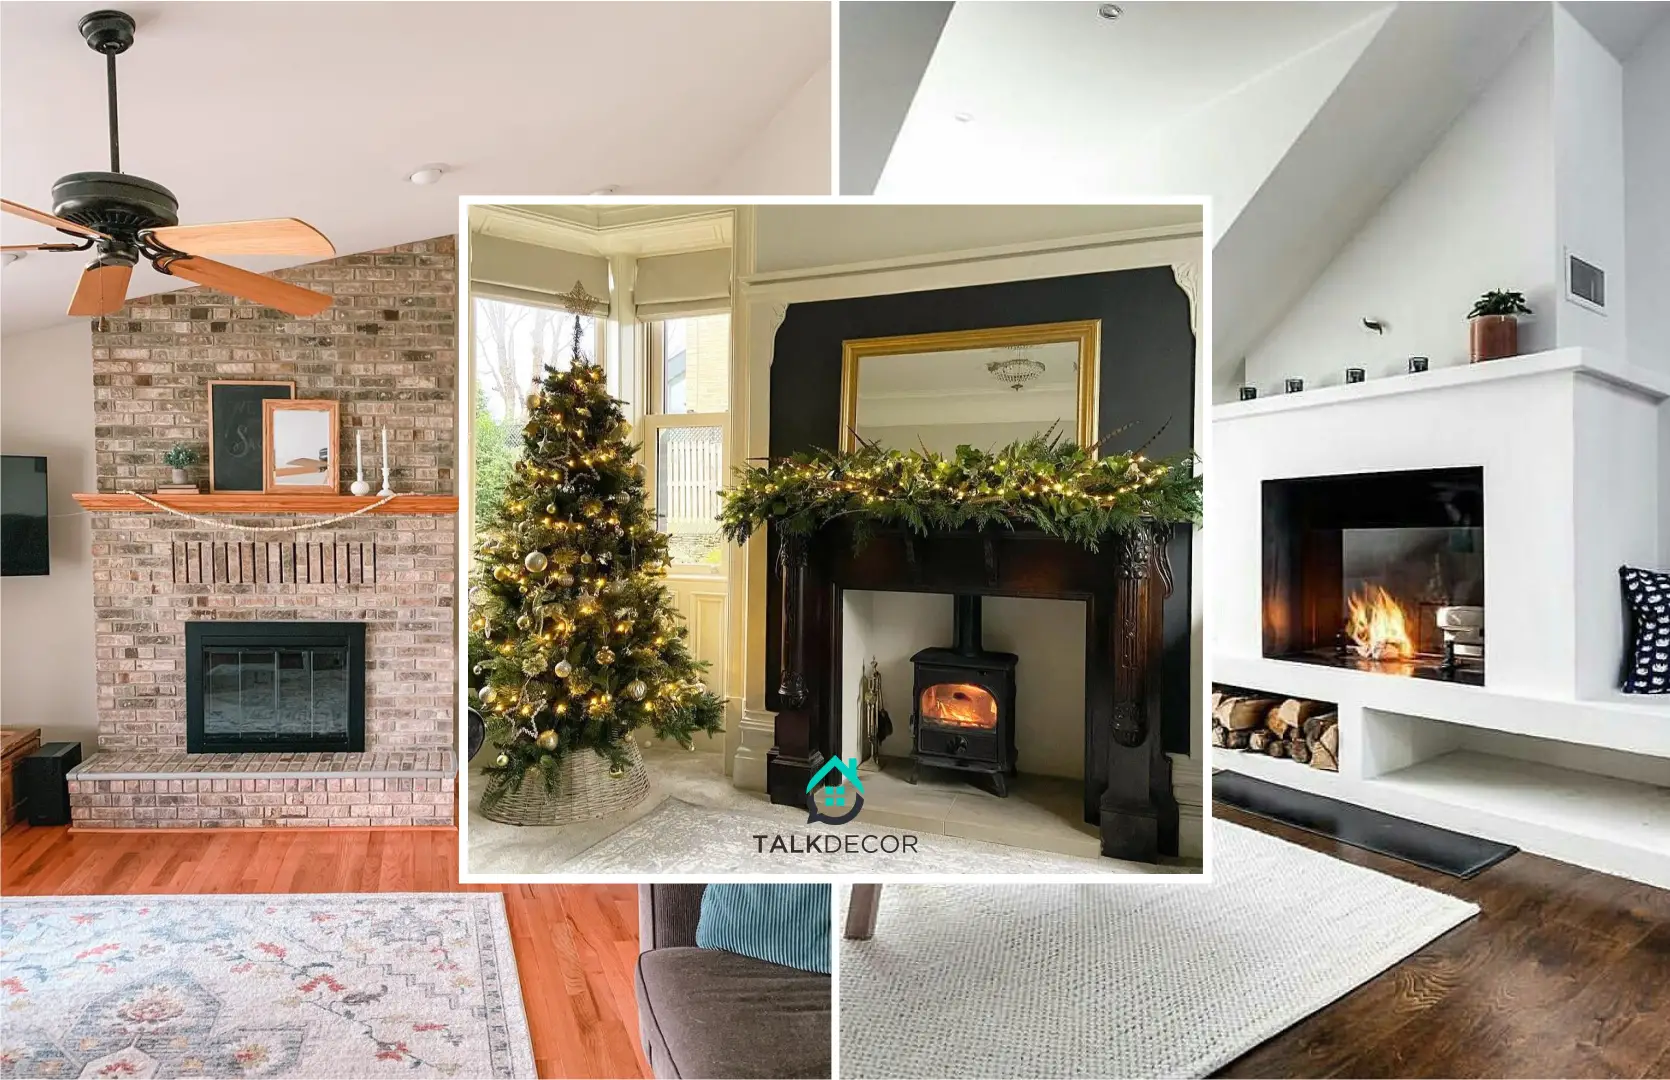 Stay Warm this Winter with These 3 Fireplace Ideas